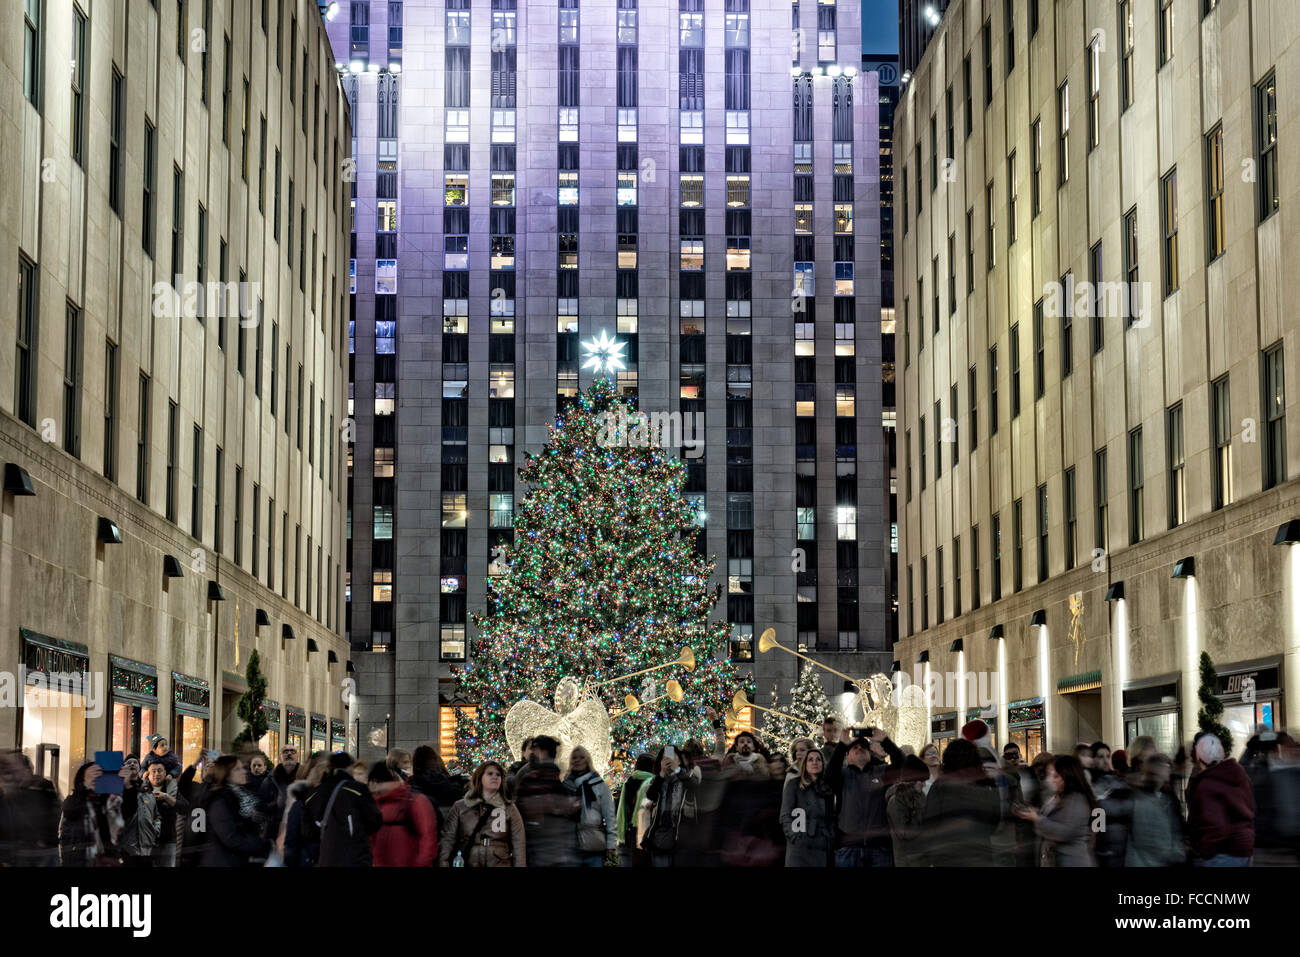 Crowds Gathered at Rockefeller Center Plaza, Fifth Avenue, Manhattan, New York City, Admiring the Holiday Decorations and Christ Stock Photo